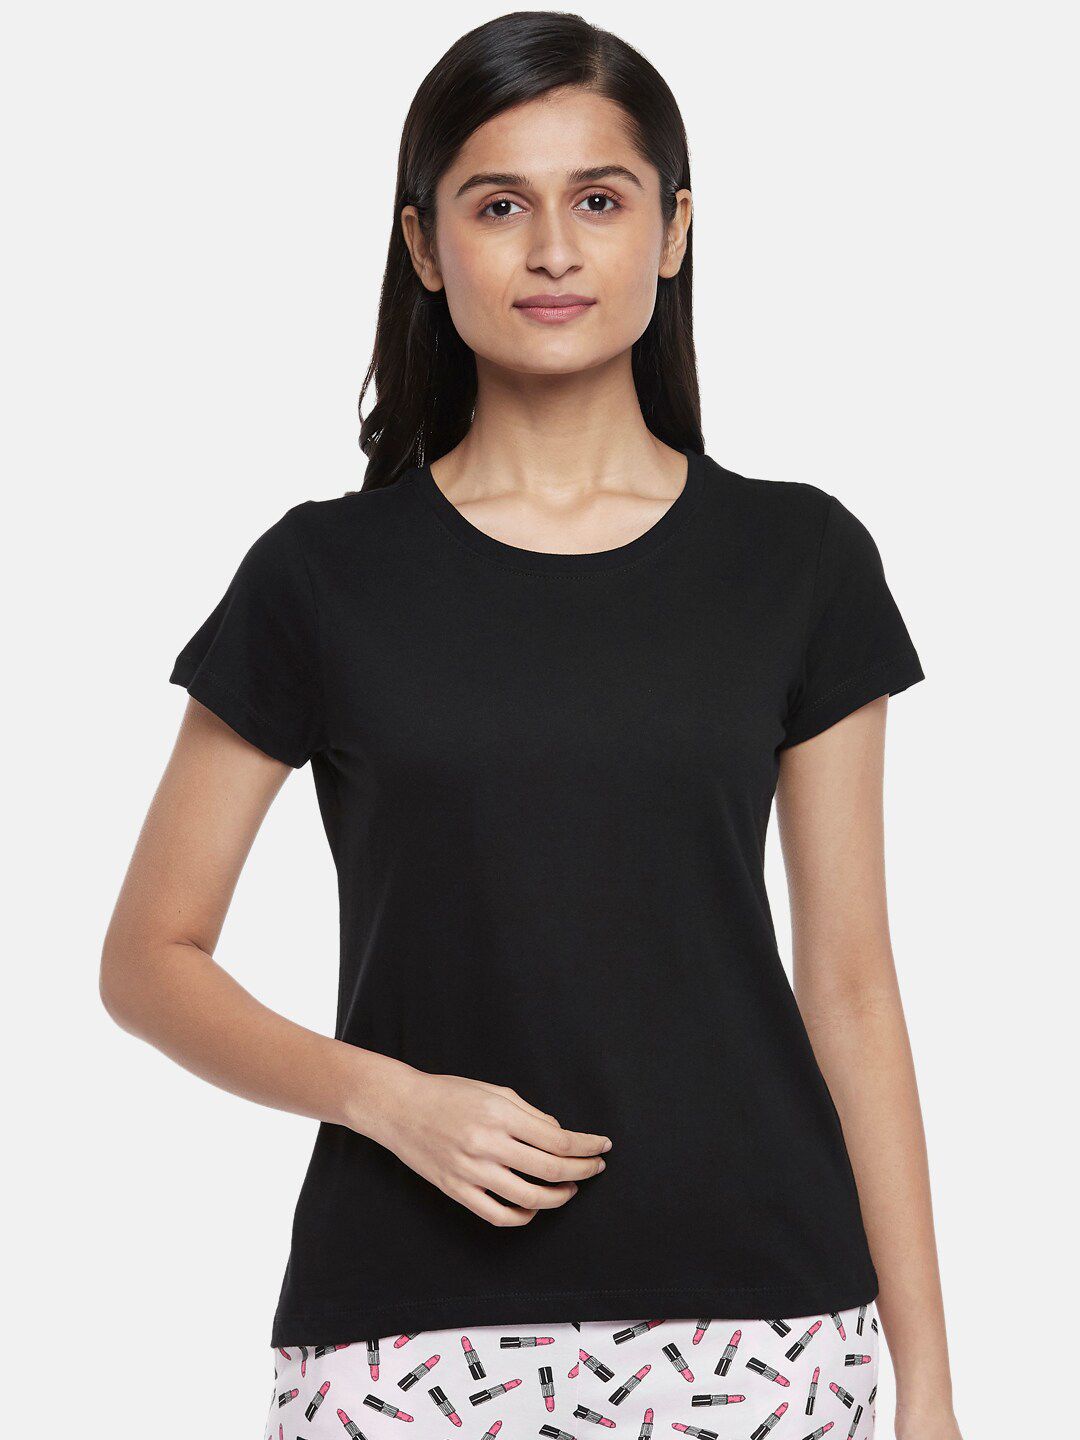 Dreamz by Pantaloons Women Black Pure Cotton T-shirt Price in India